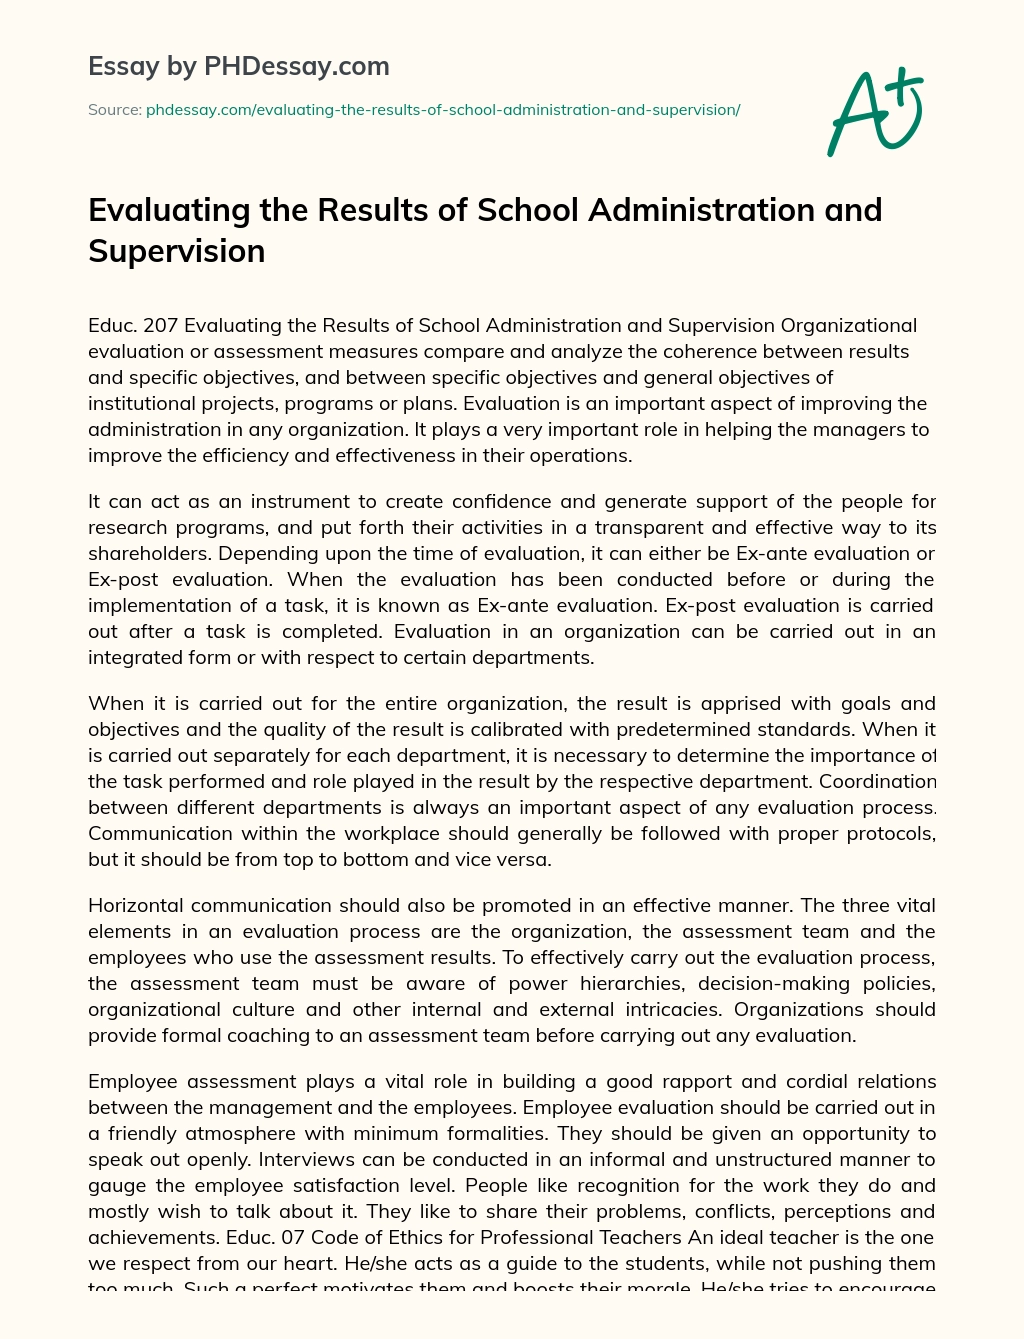 Evaluating the Results of School Administration and Supervision